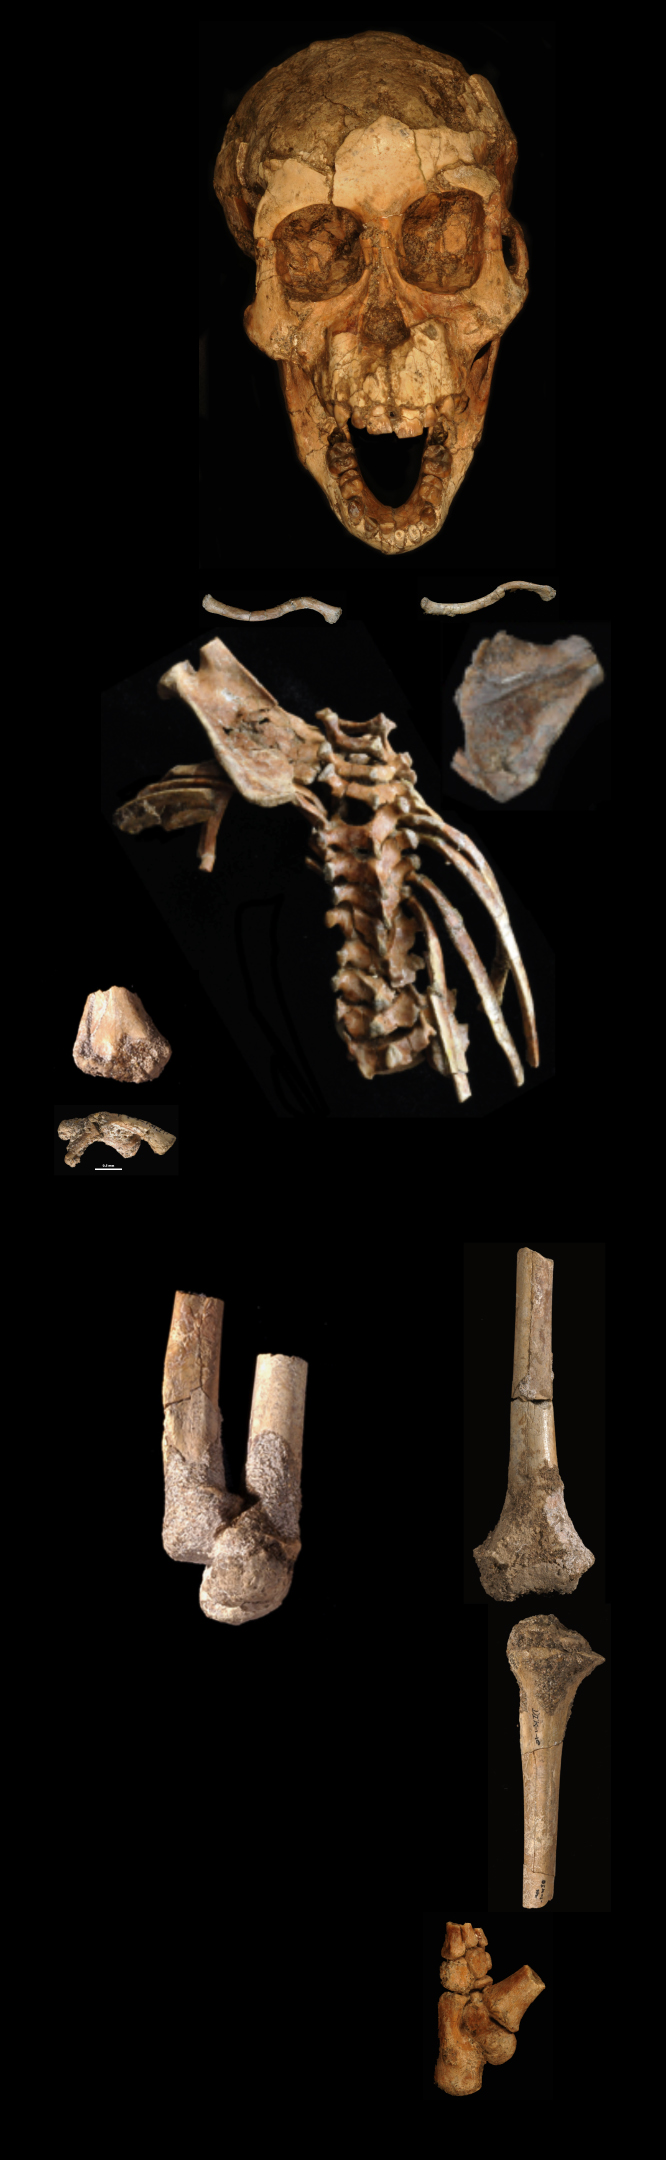 A Toddler Who Lived 3 Million Years Ago Could Walk Upright And Capably Climb Trees